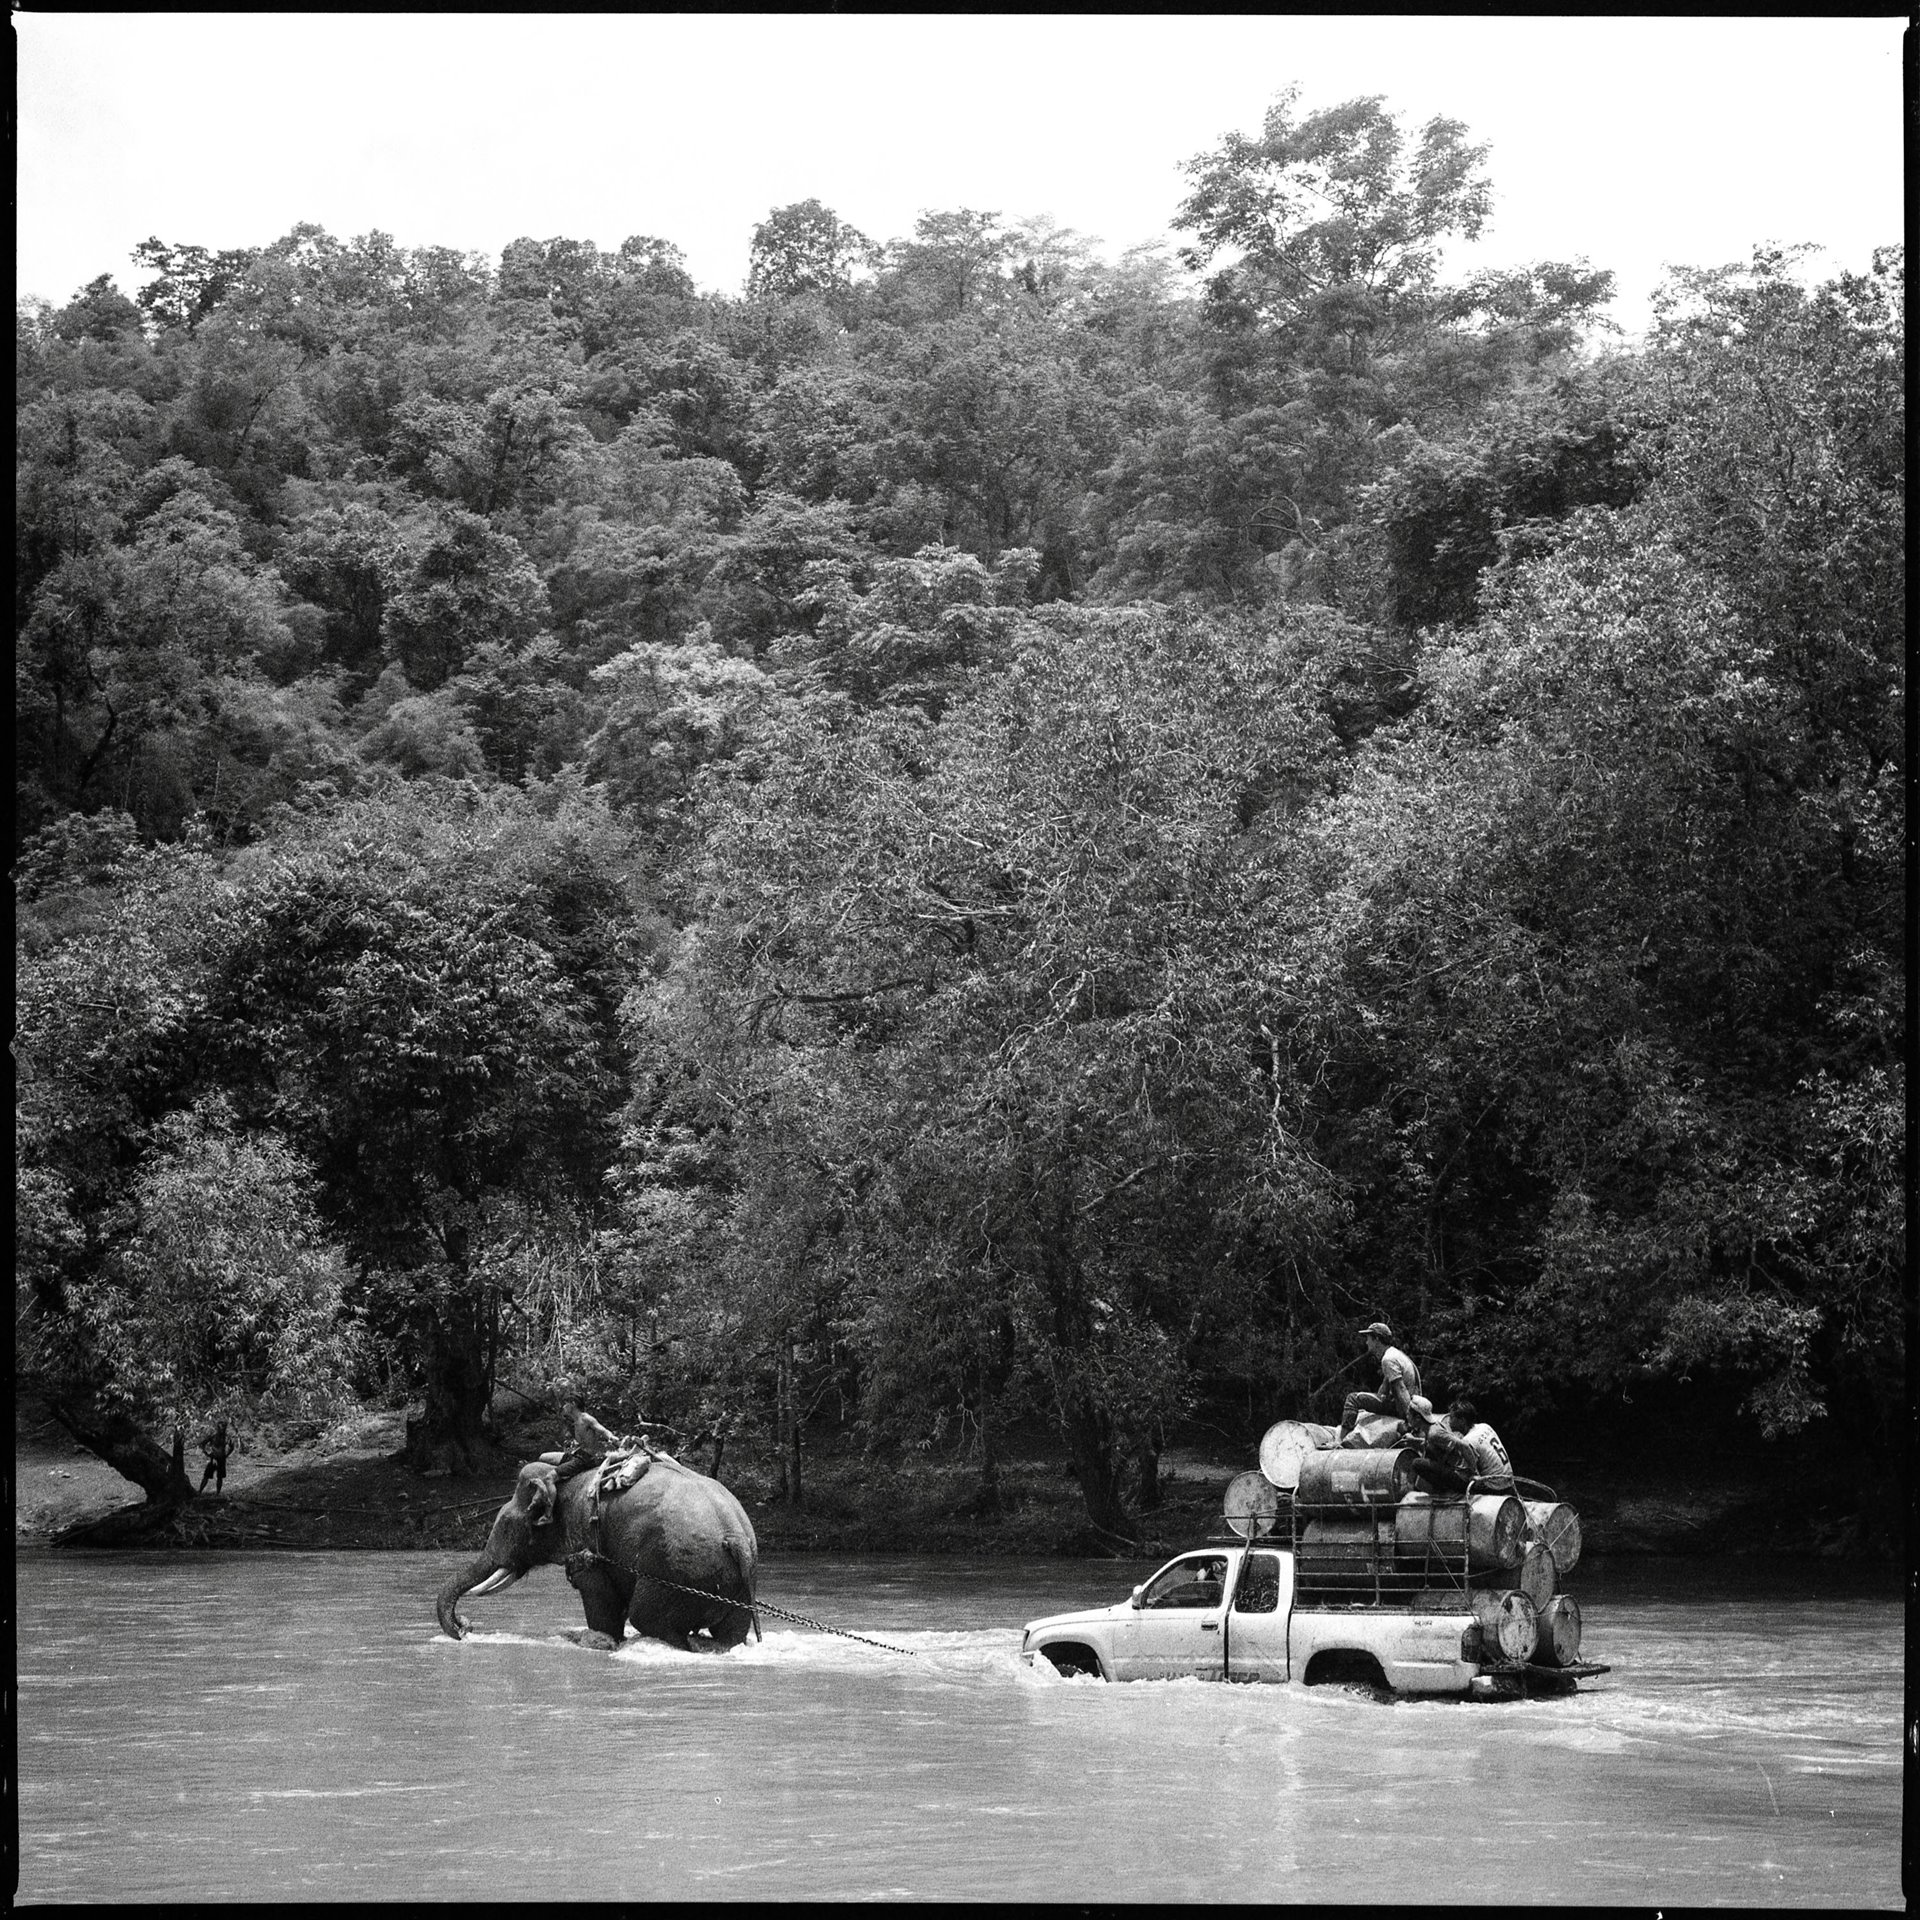 Villagers cross a flooded creek with the help of an elephant, in Kayah (Karenni) State, Myanmar. Military authorities had cut off food, medical, and fuel supplies forcing villagers to use jungle routes to transport goods. Floods triggered by monsoon rains displaced approximately 60,000 people between mid-July and mid-August 2023 across Myanmar.